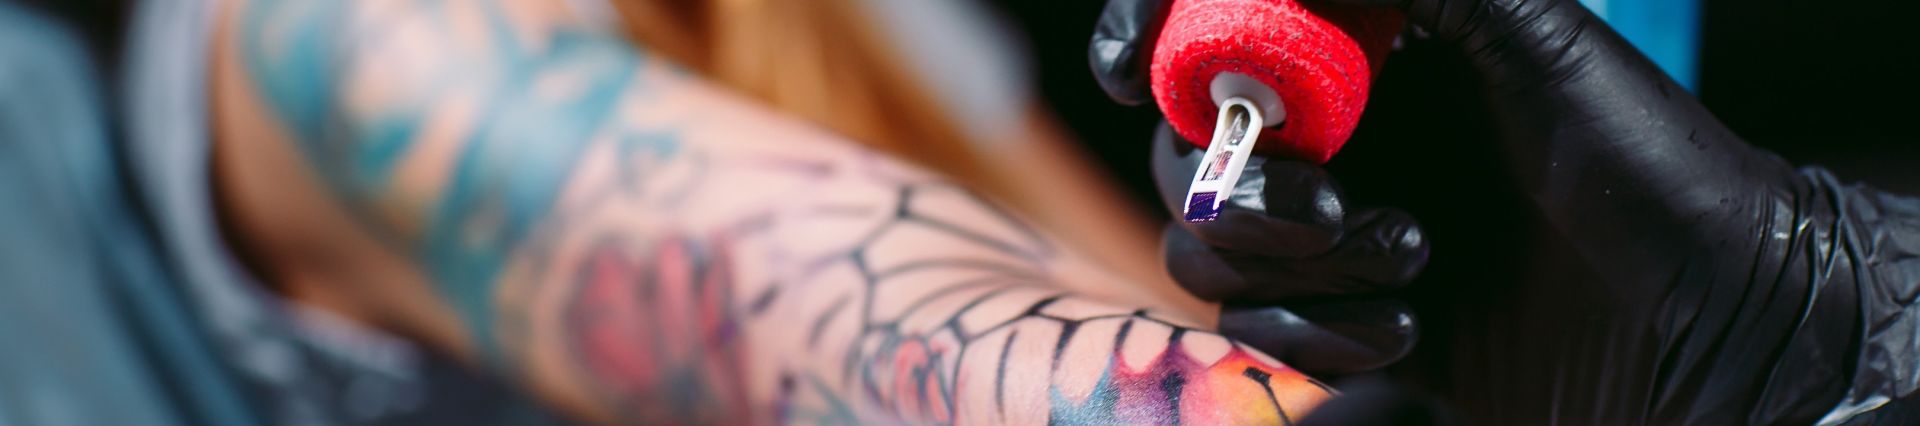 Close up of colorful sleeve tattoo in progress with the tattoo artist's gun resting a couple inches above